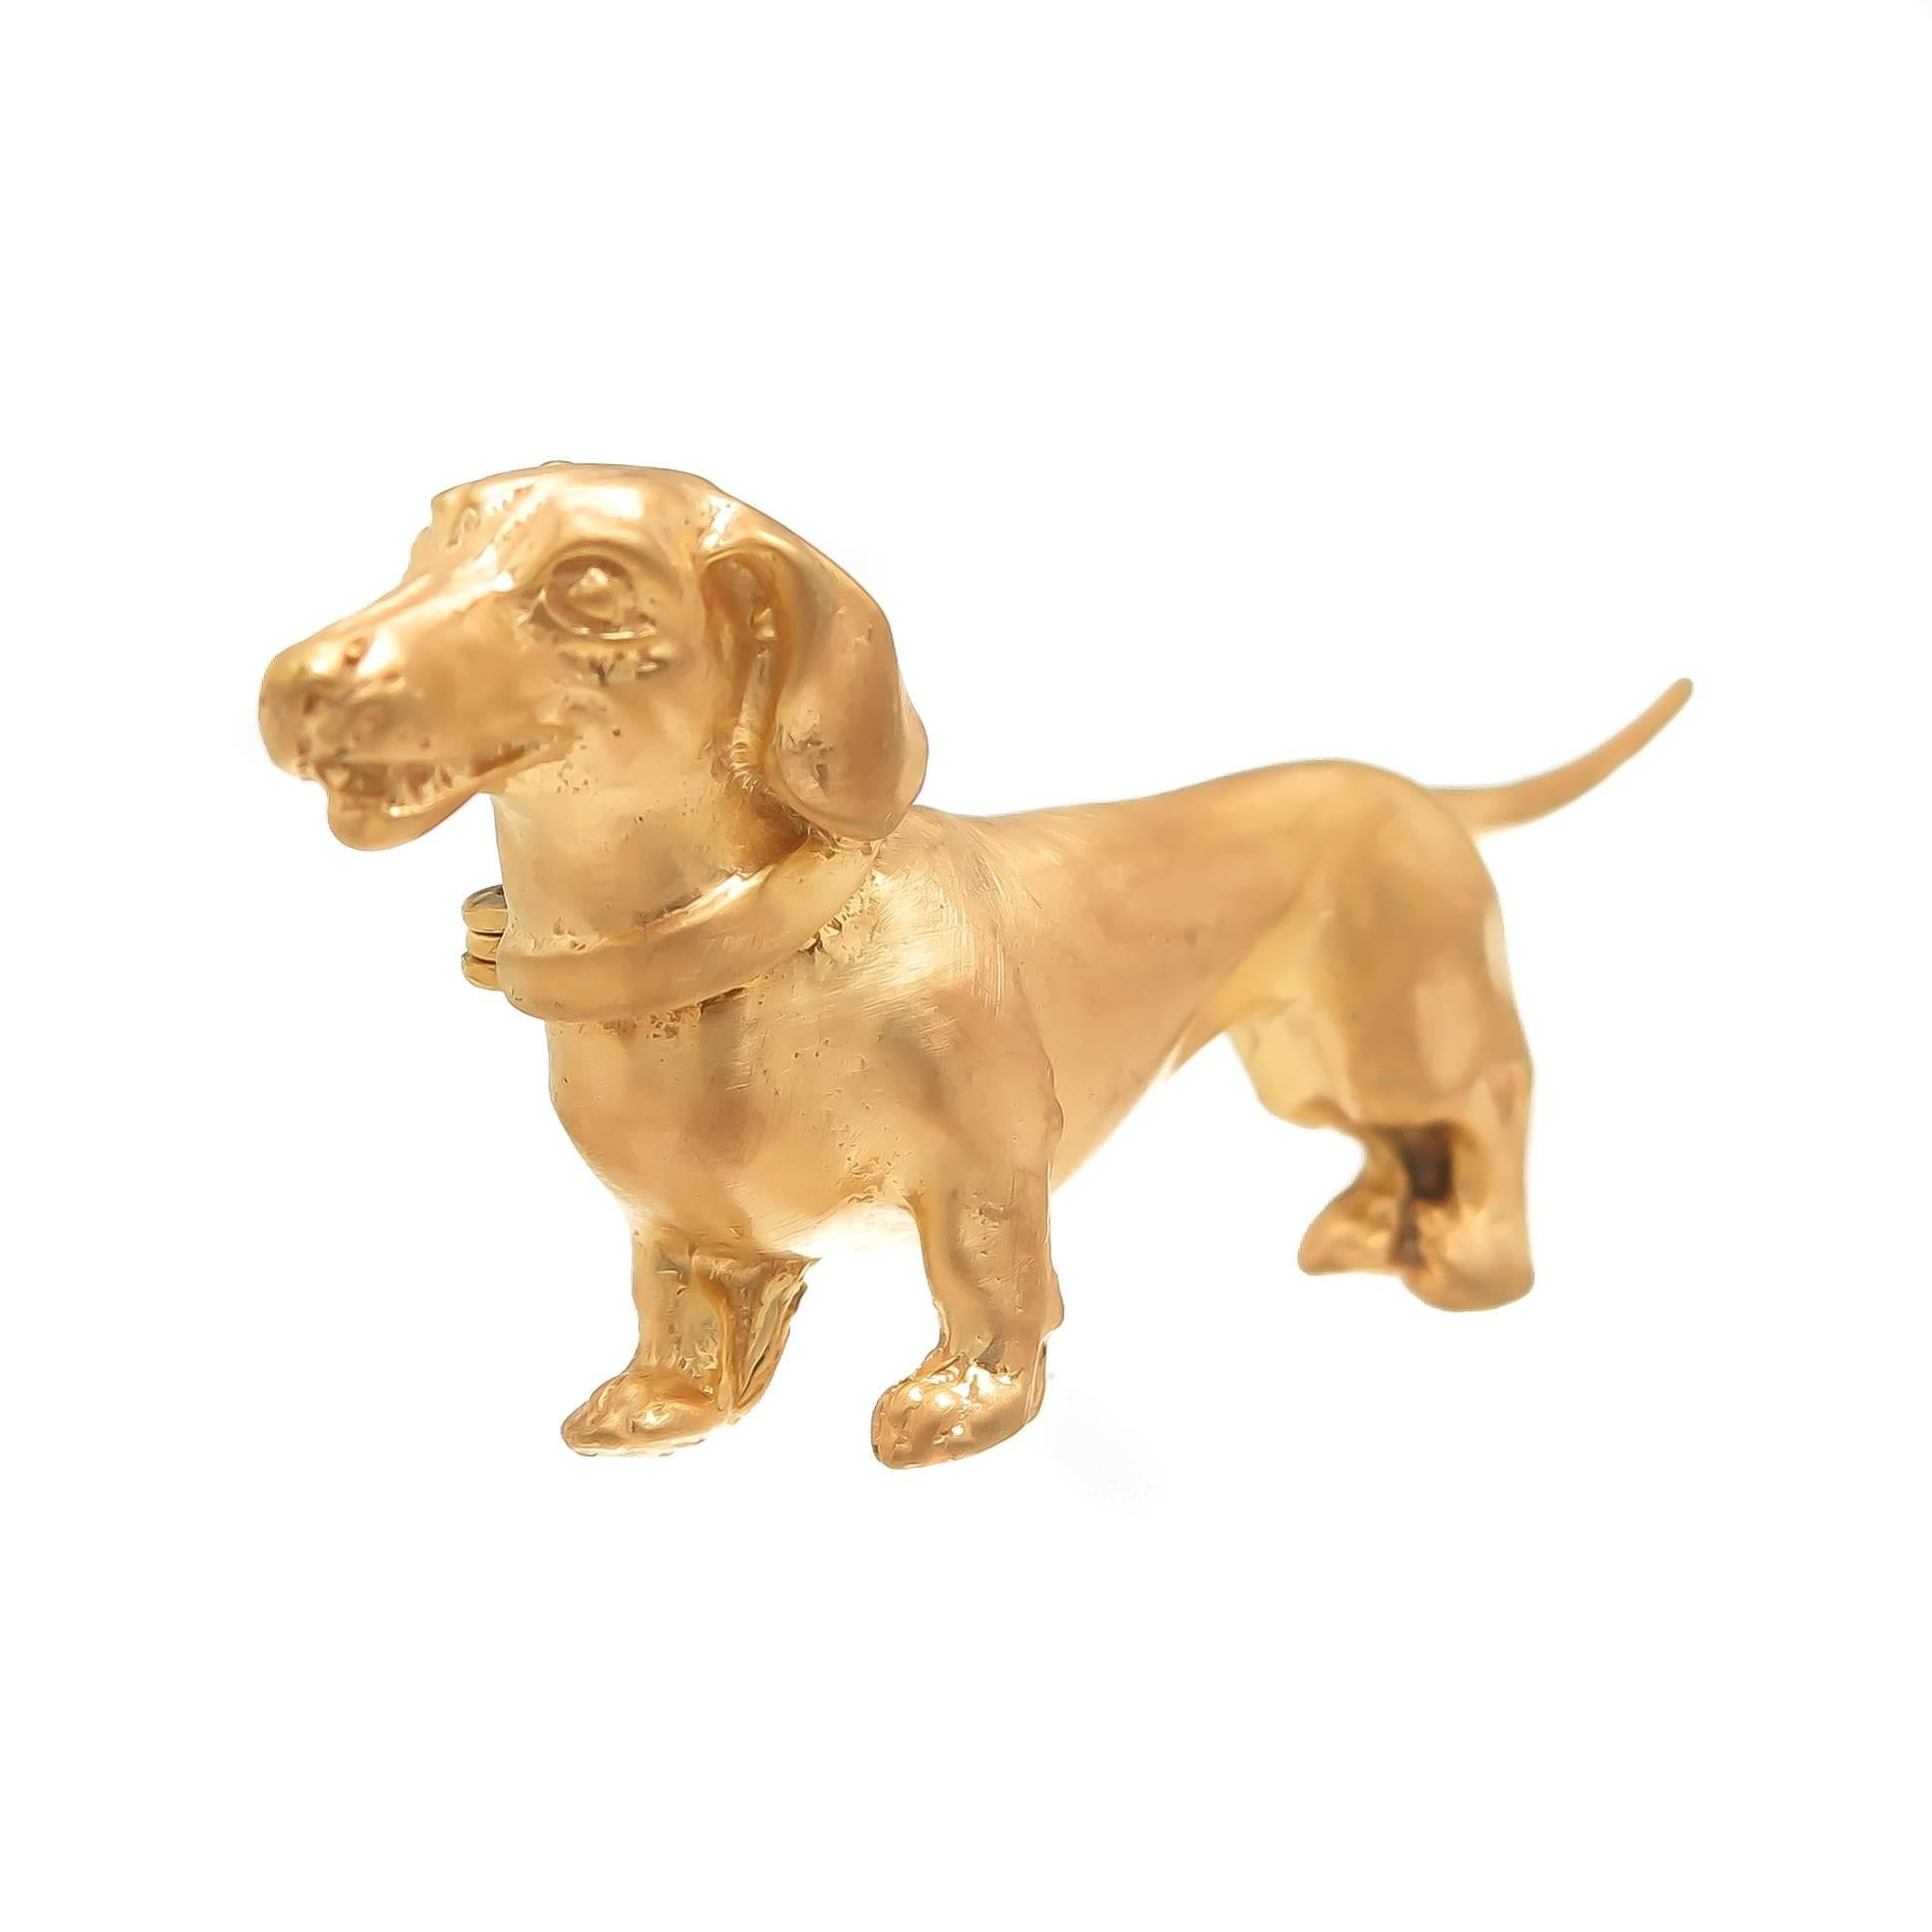 Circa 1960s Gold Plate on Sterling Silver Dachshund Dog Brooch, measuring 2 inch in length and having very nice detail.